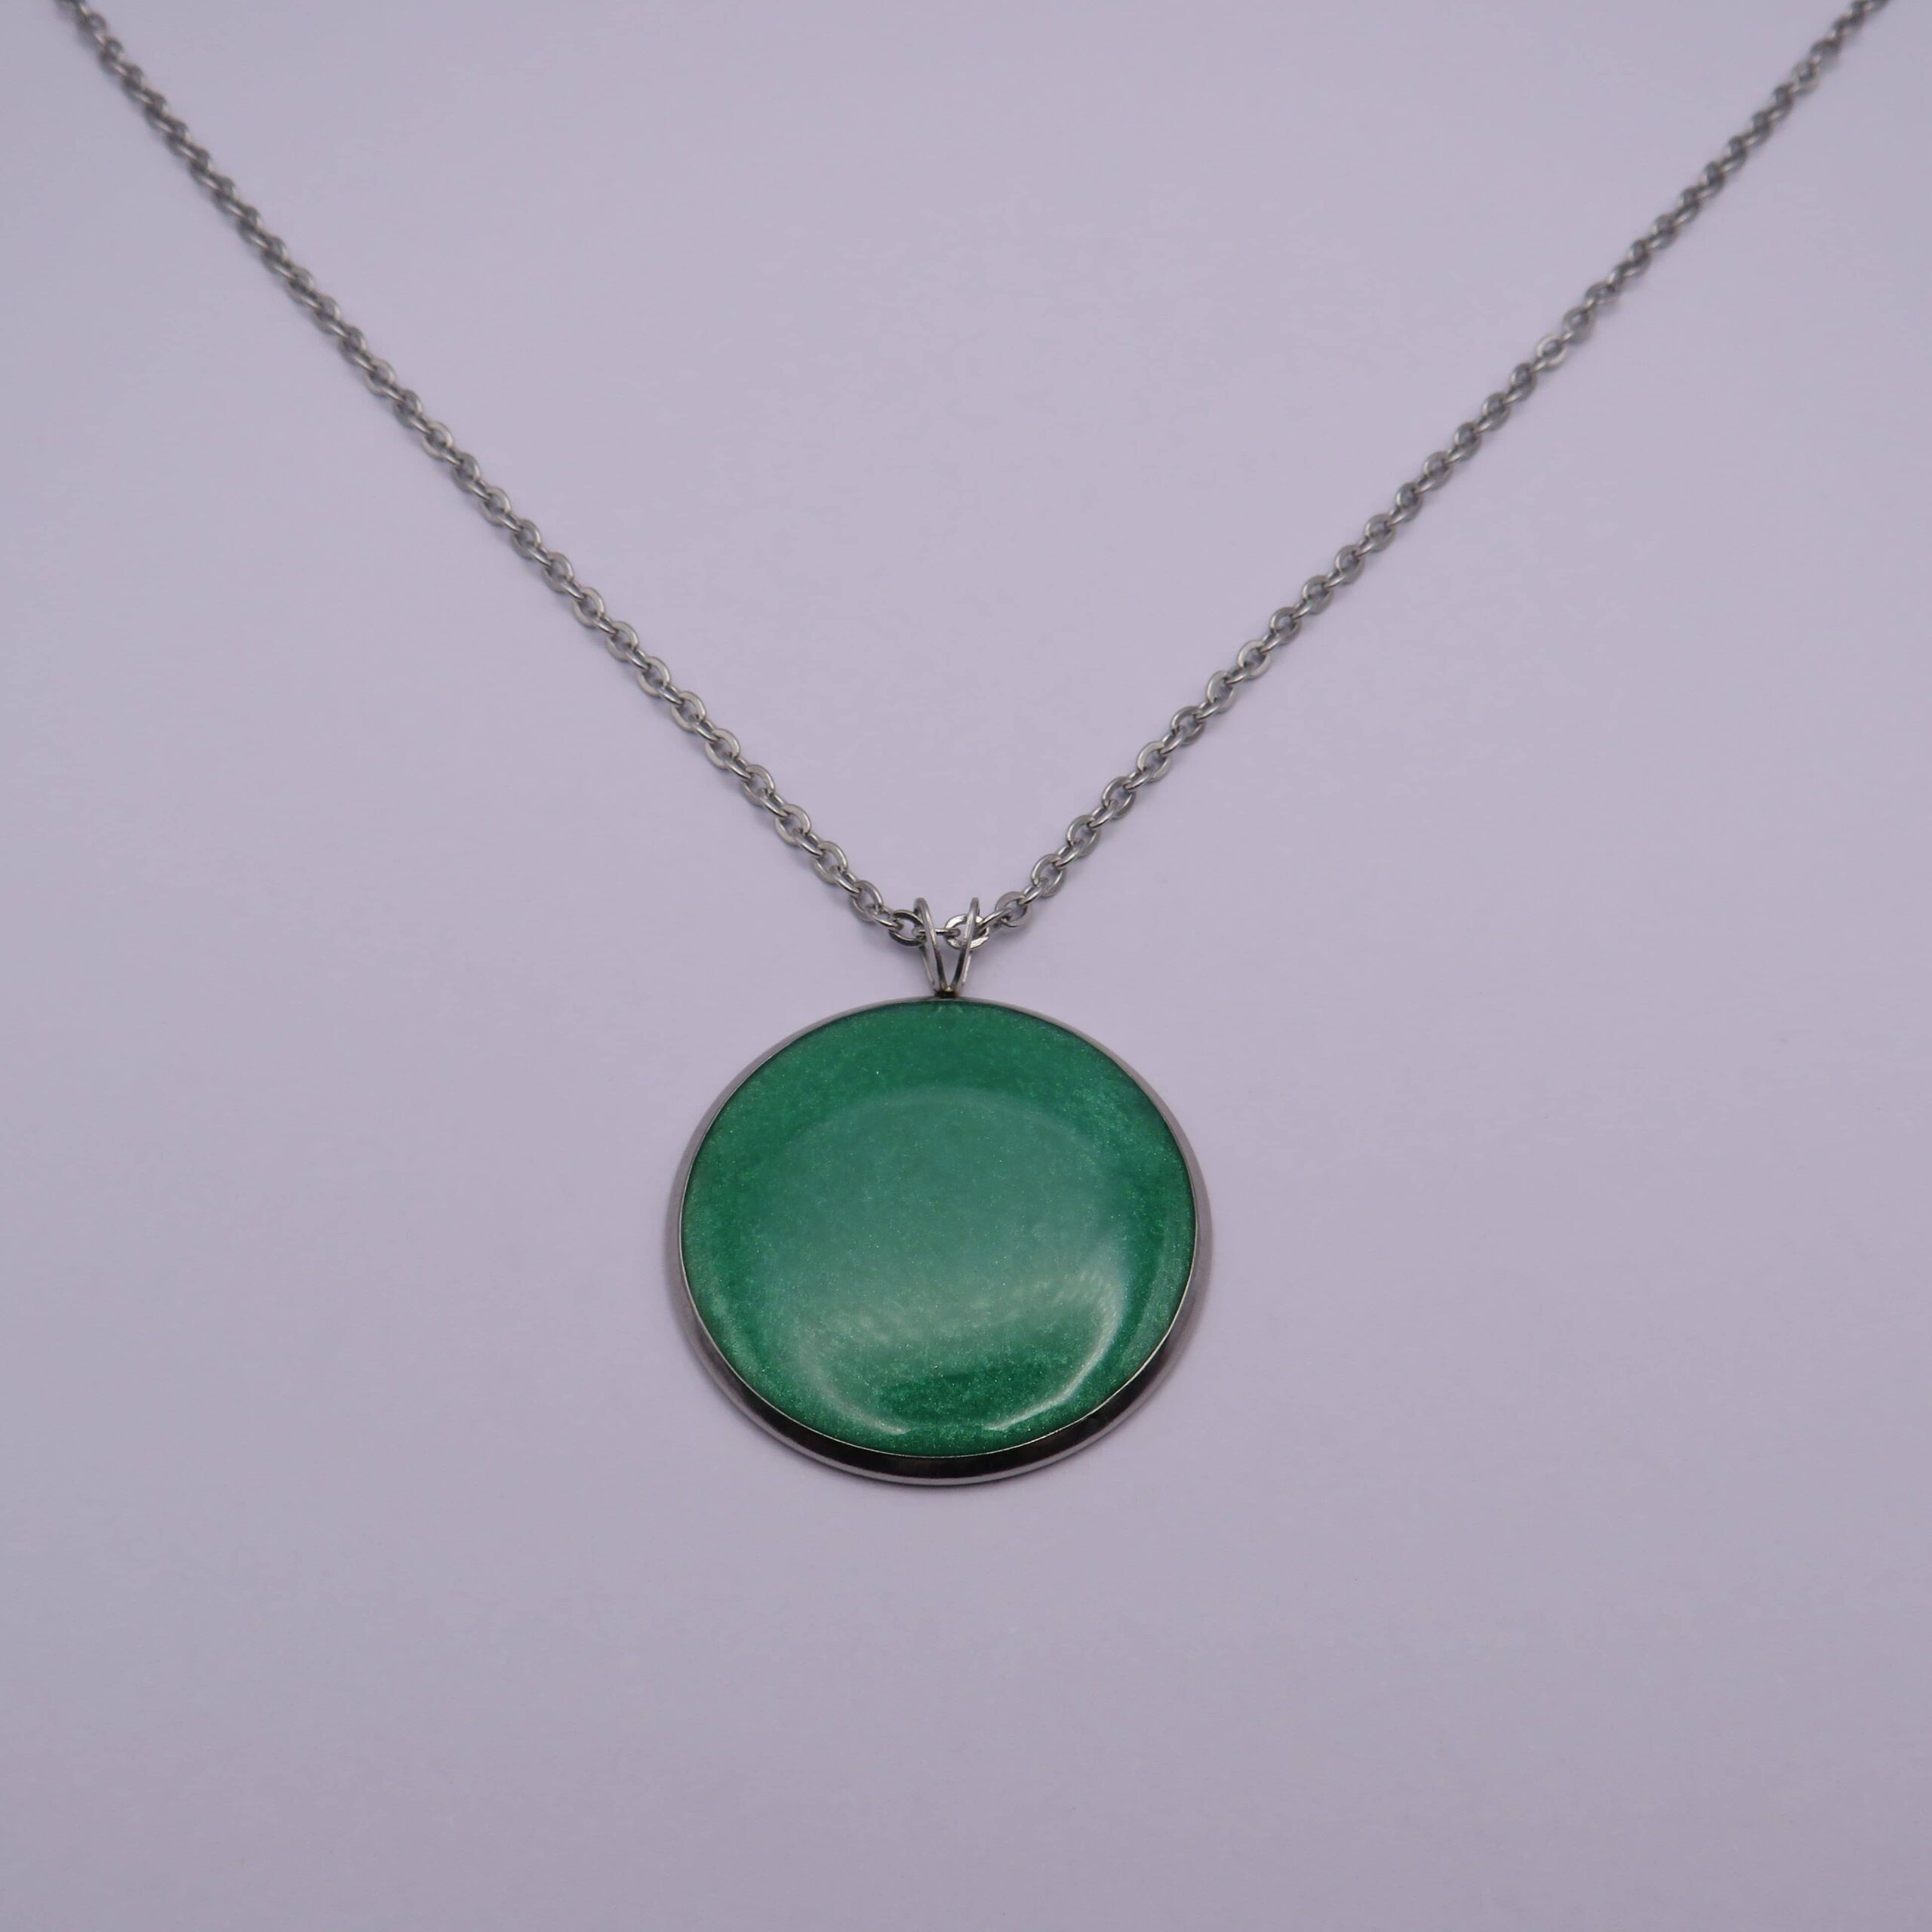 Stainless Steel Long Large Green Cabochon Pendant Necklace